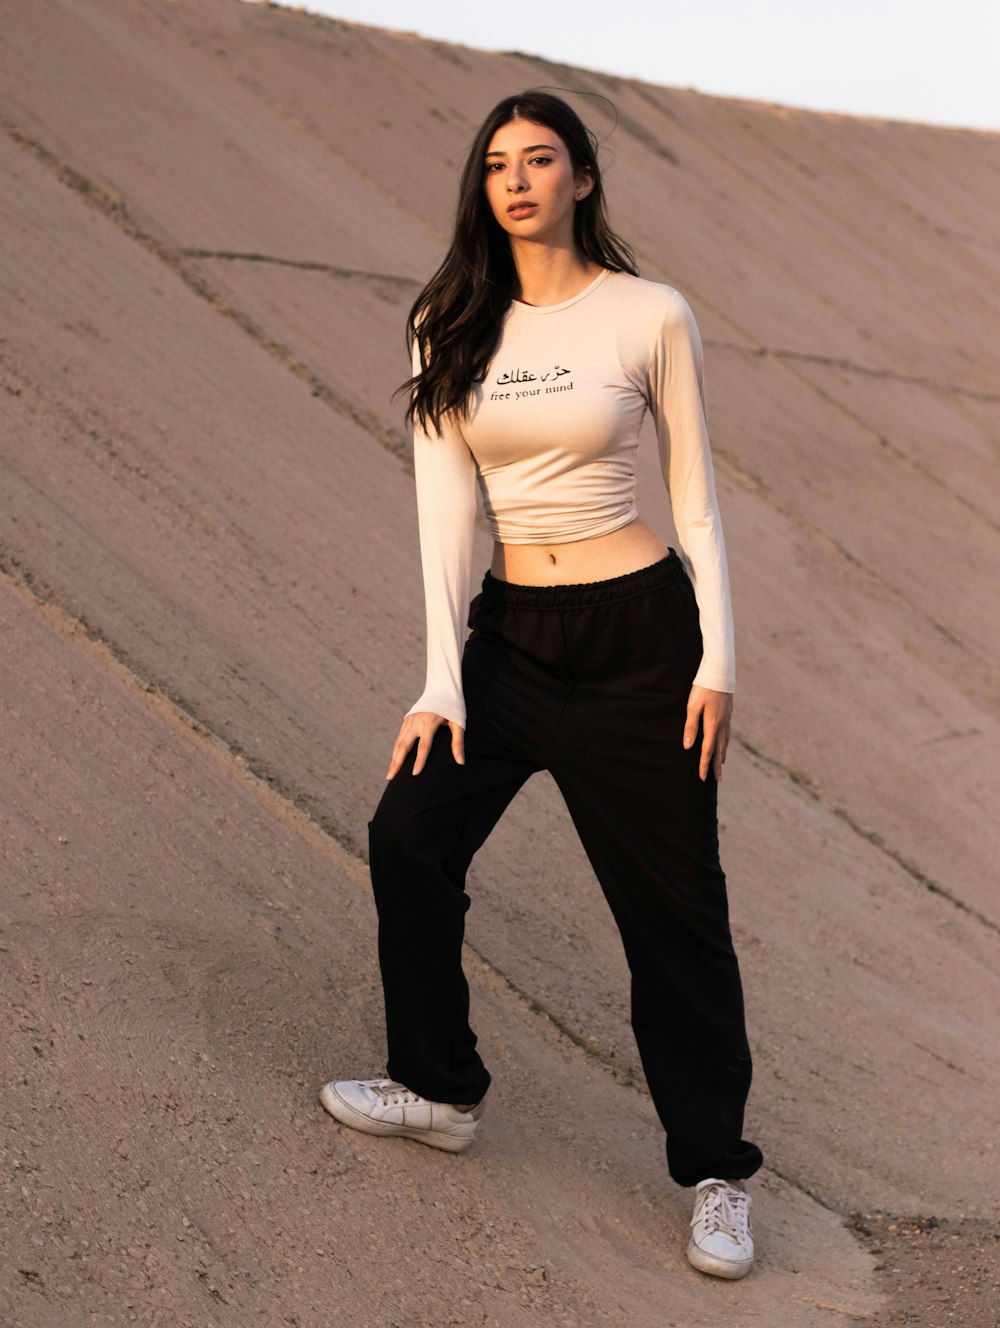 woman in white long sleeve shirt and black pants standing on gray asphalt road during daytime